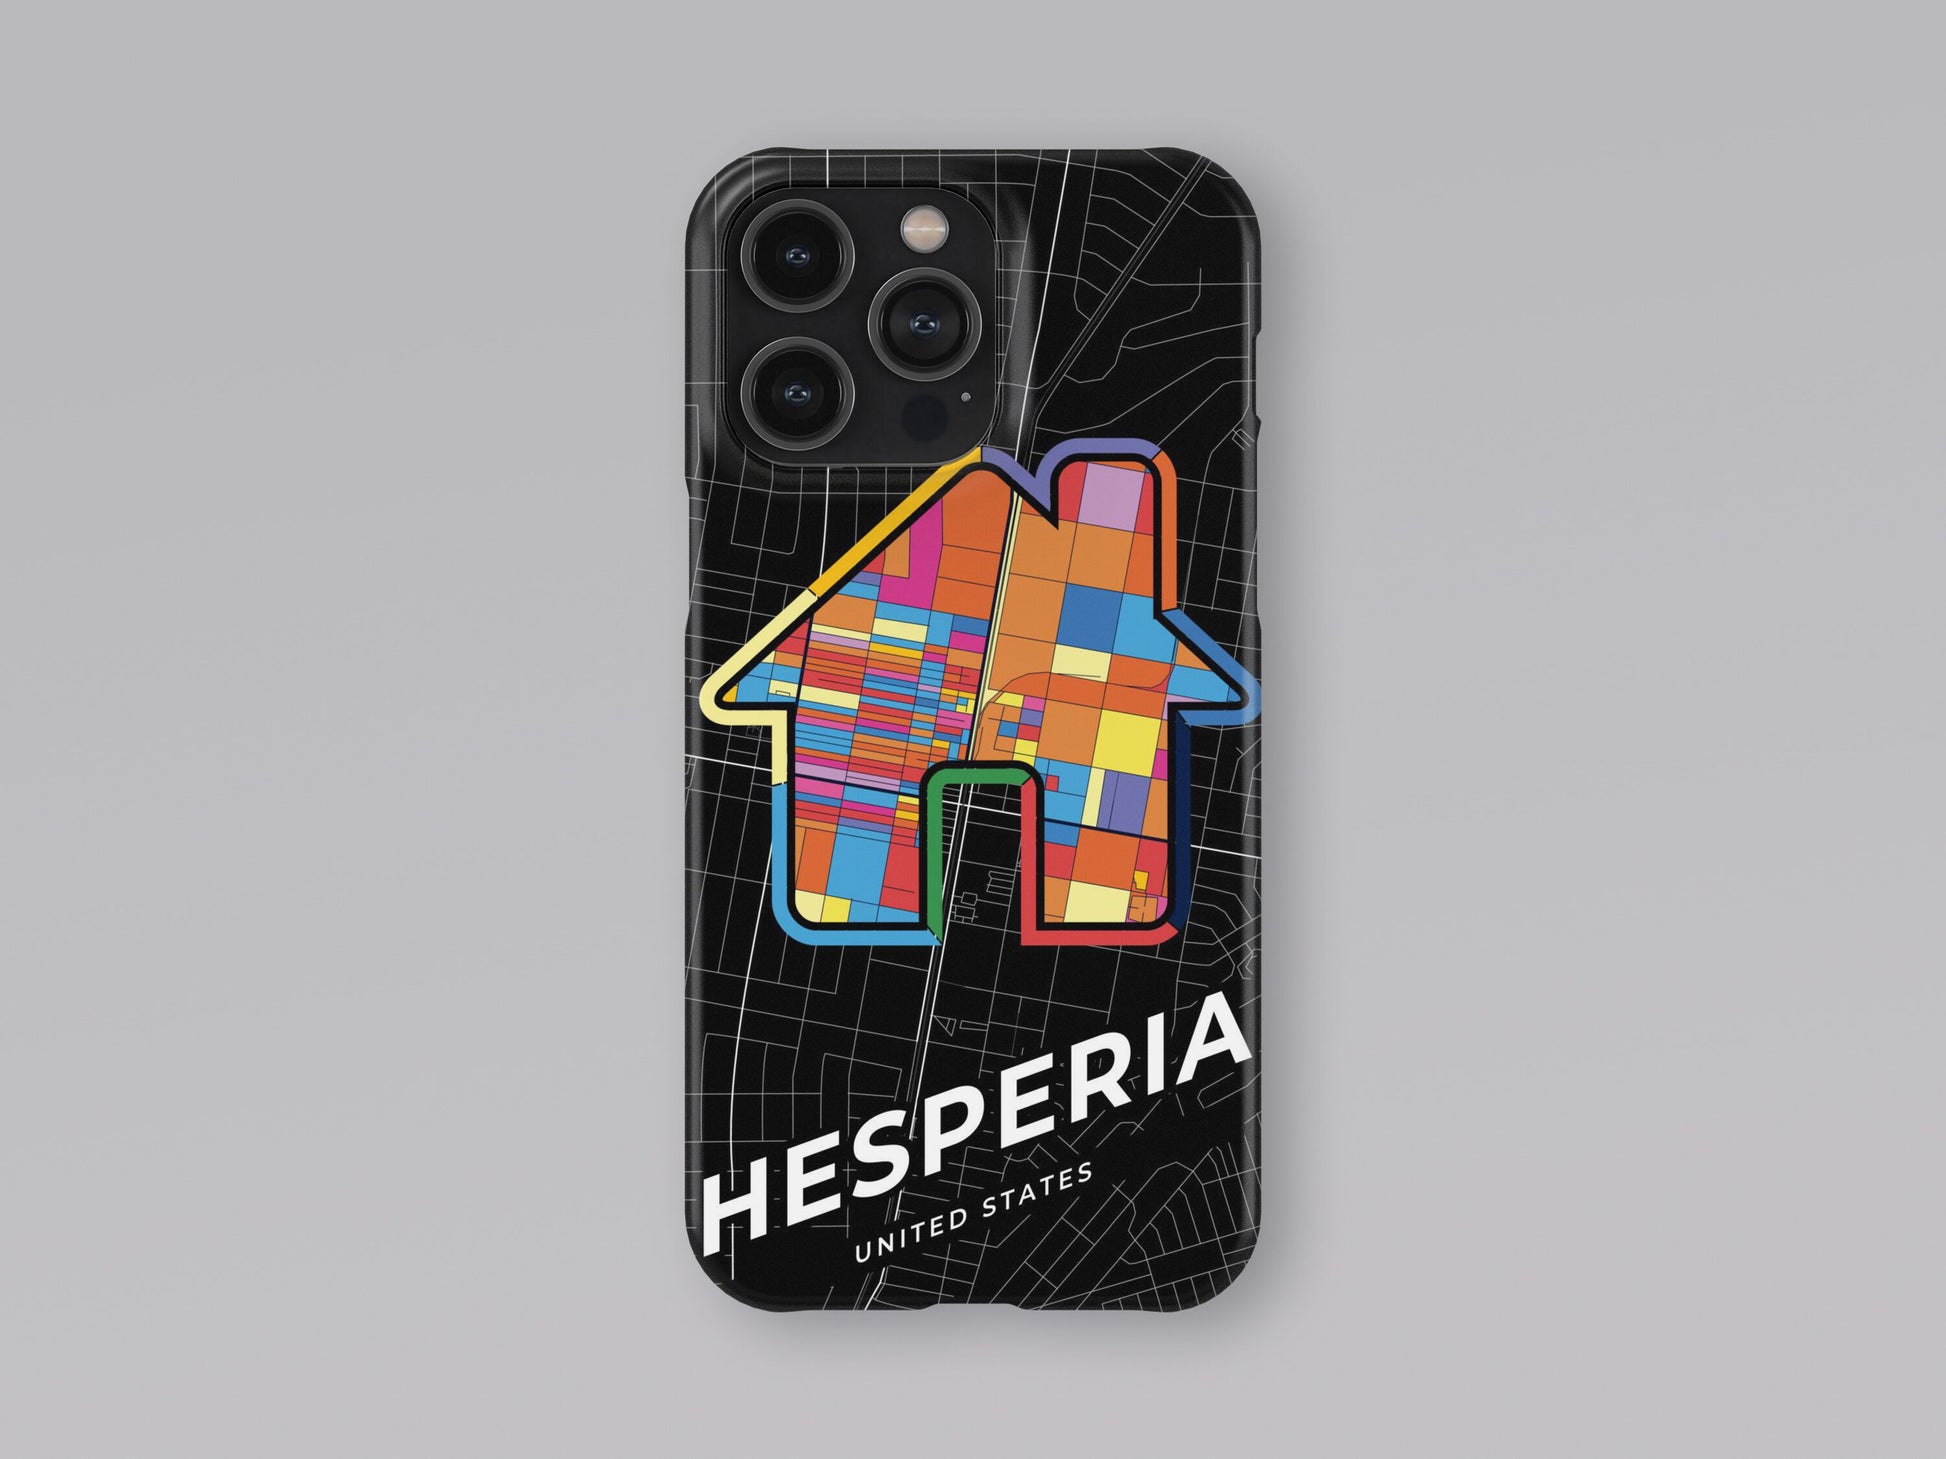 Hesperia California slim phone case with colorful icon. Birthday, wedding or housewarming gift. Couple match cases. 3